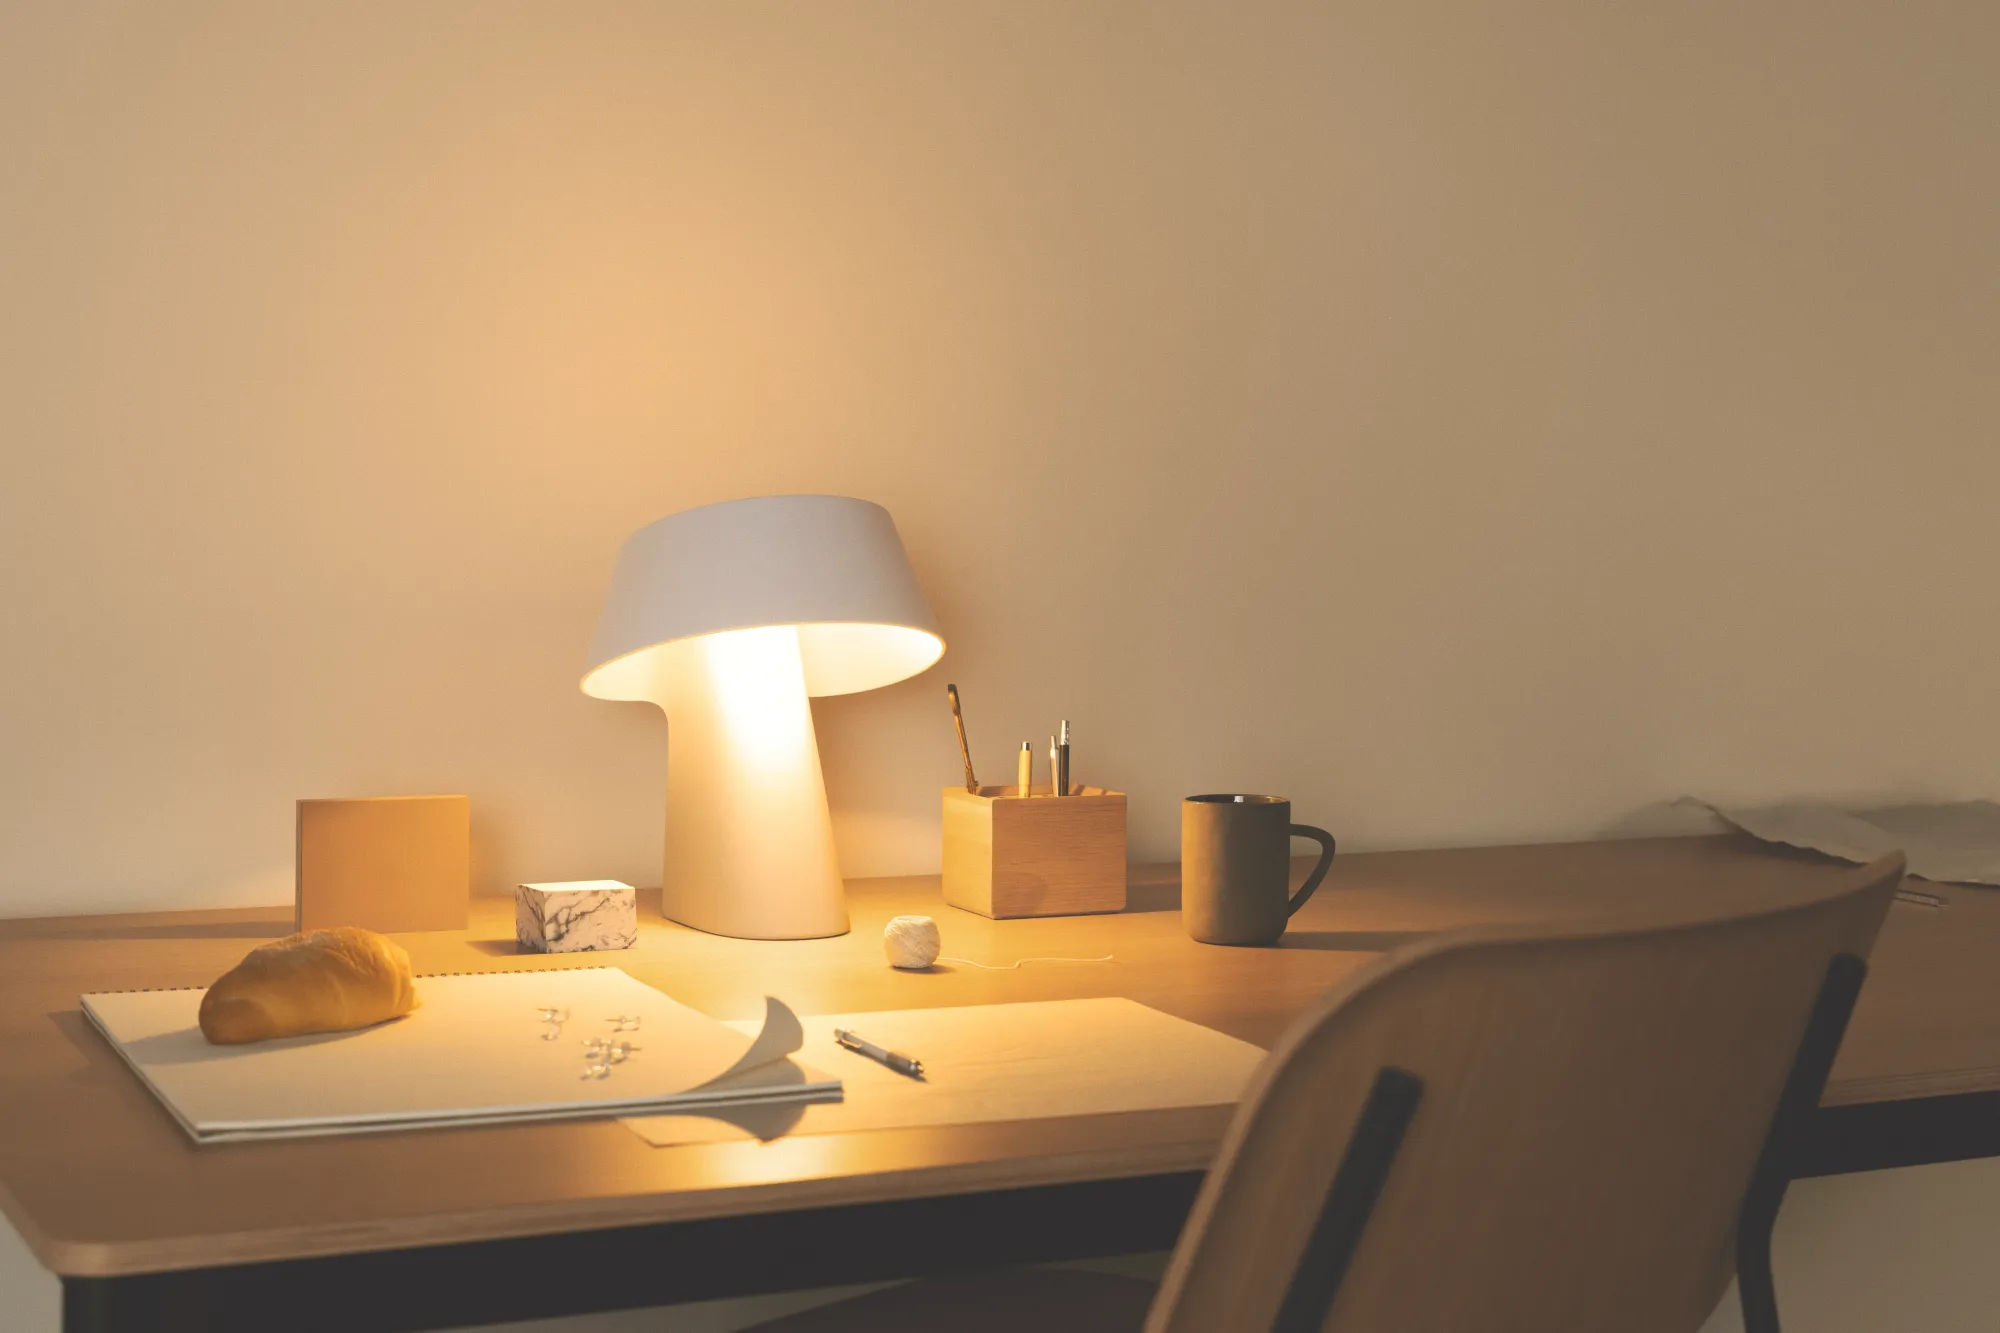 Gantri’s Fold Table Light lights up a small home office area.